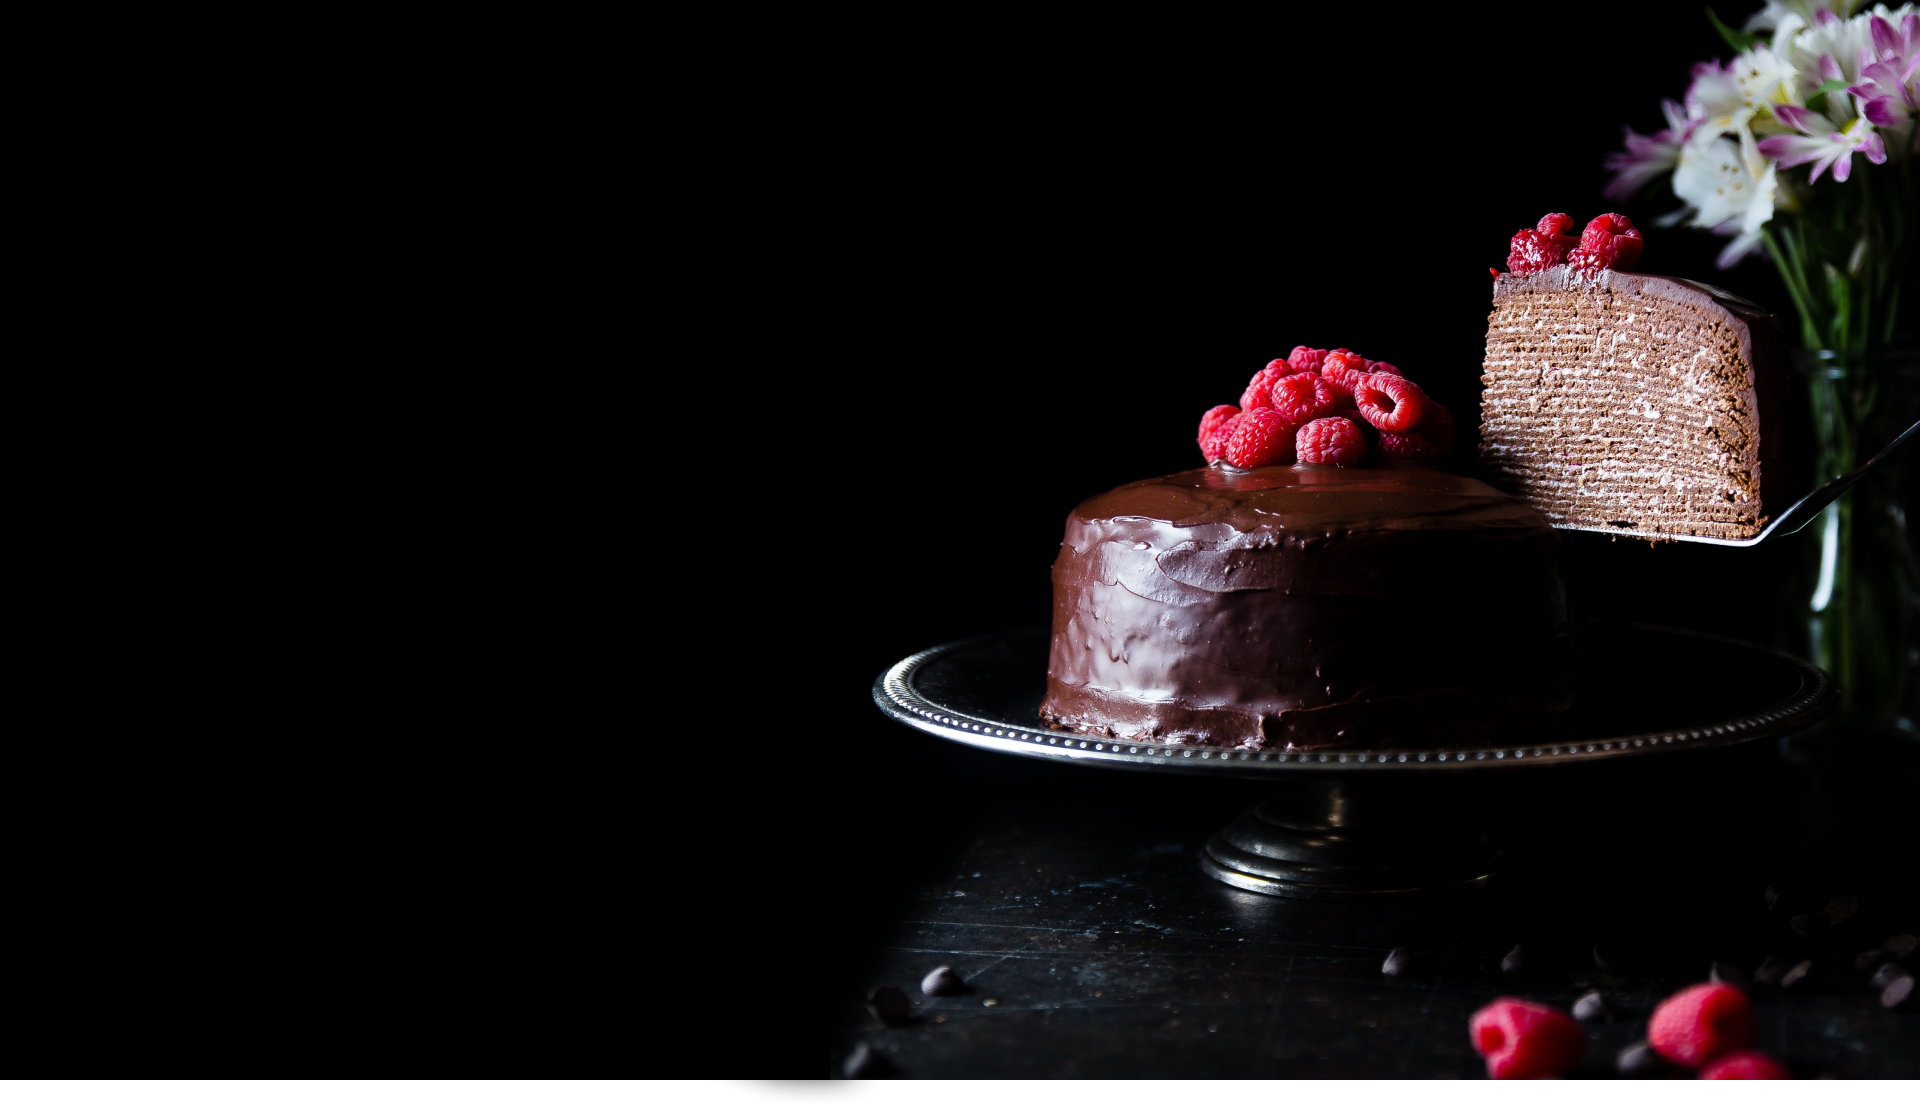 Food and Culinary Photography | Digiworld Media